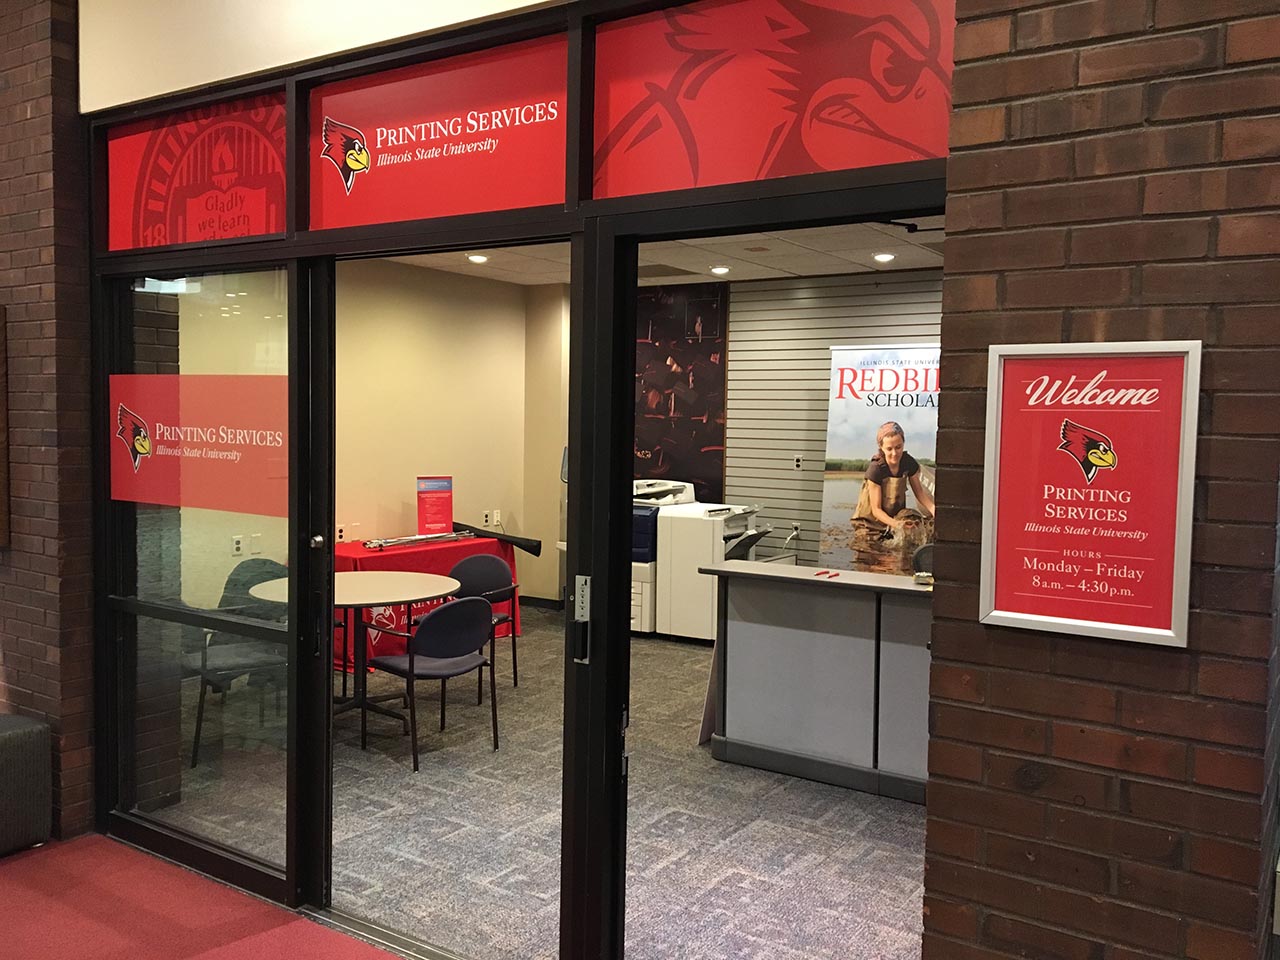 The open, glass doors of the Printing Services Office, with a red banner and a desk.